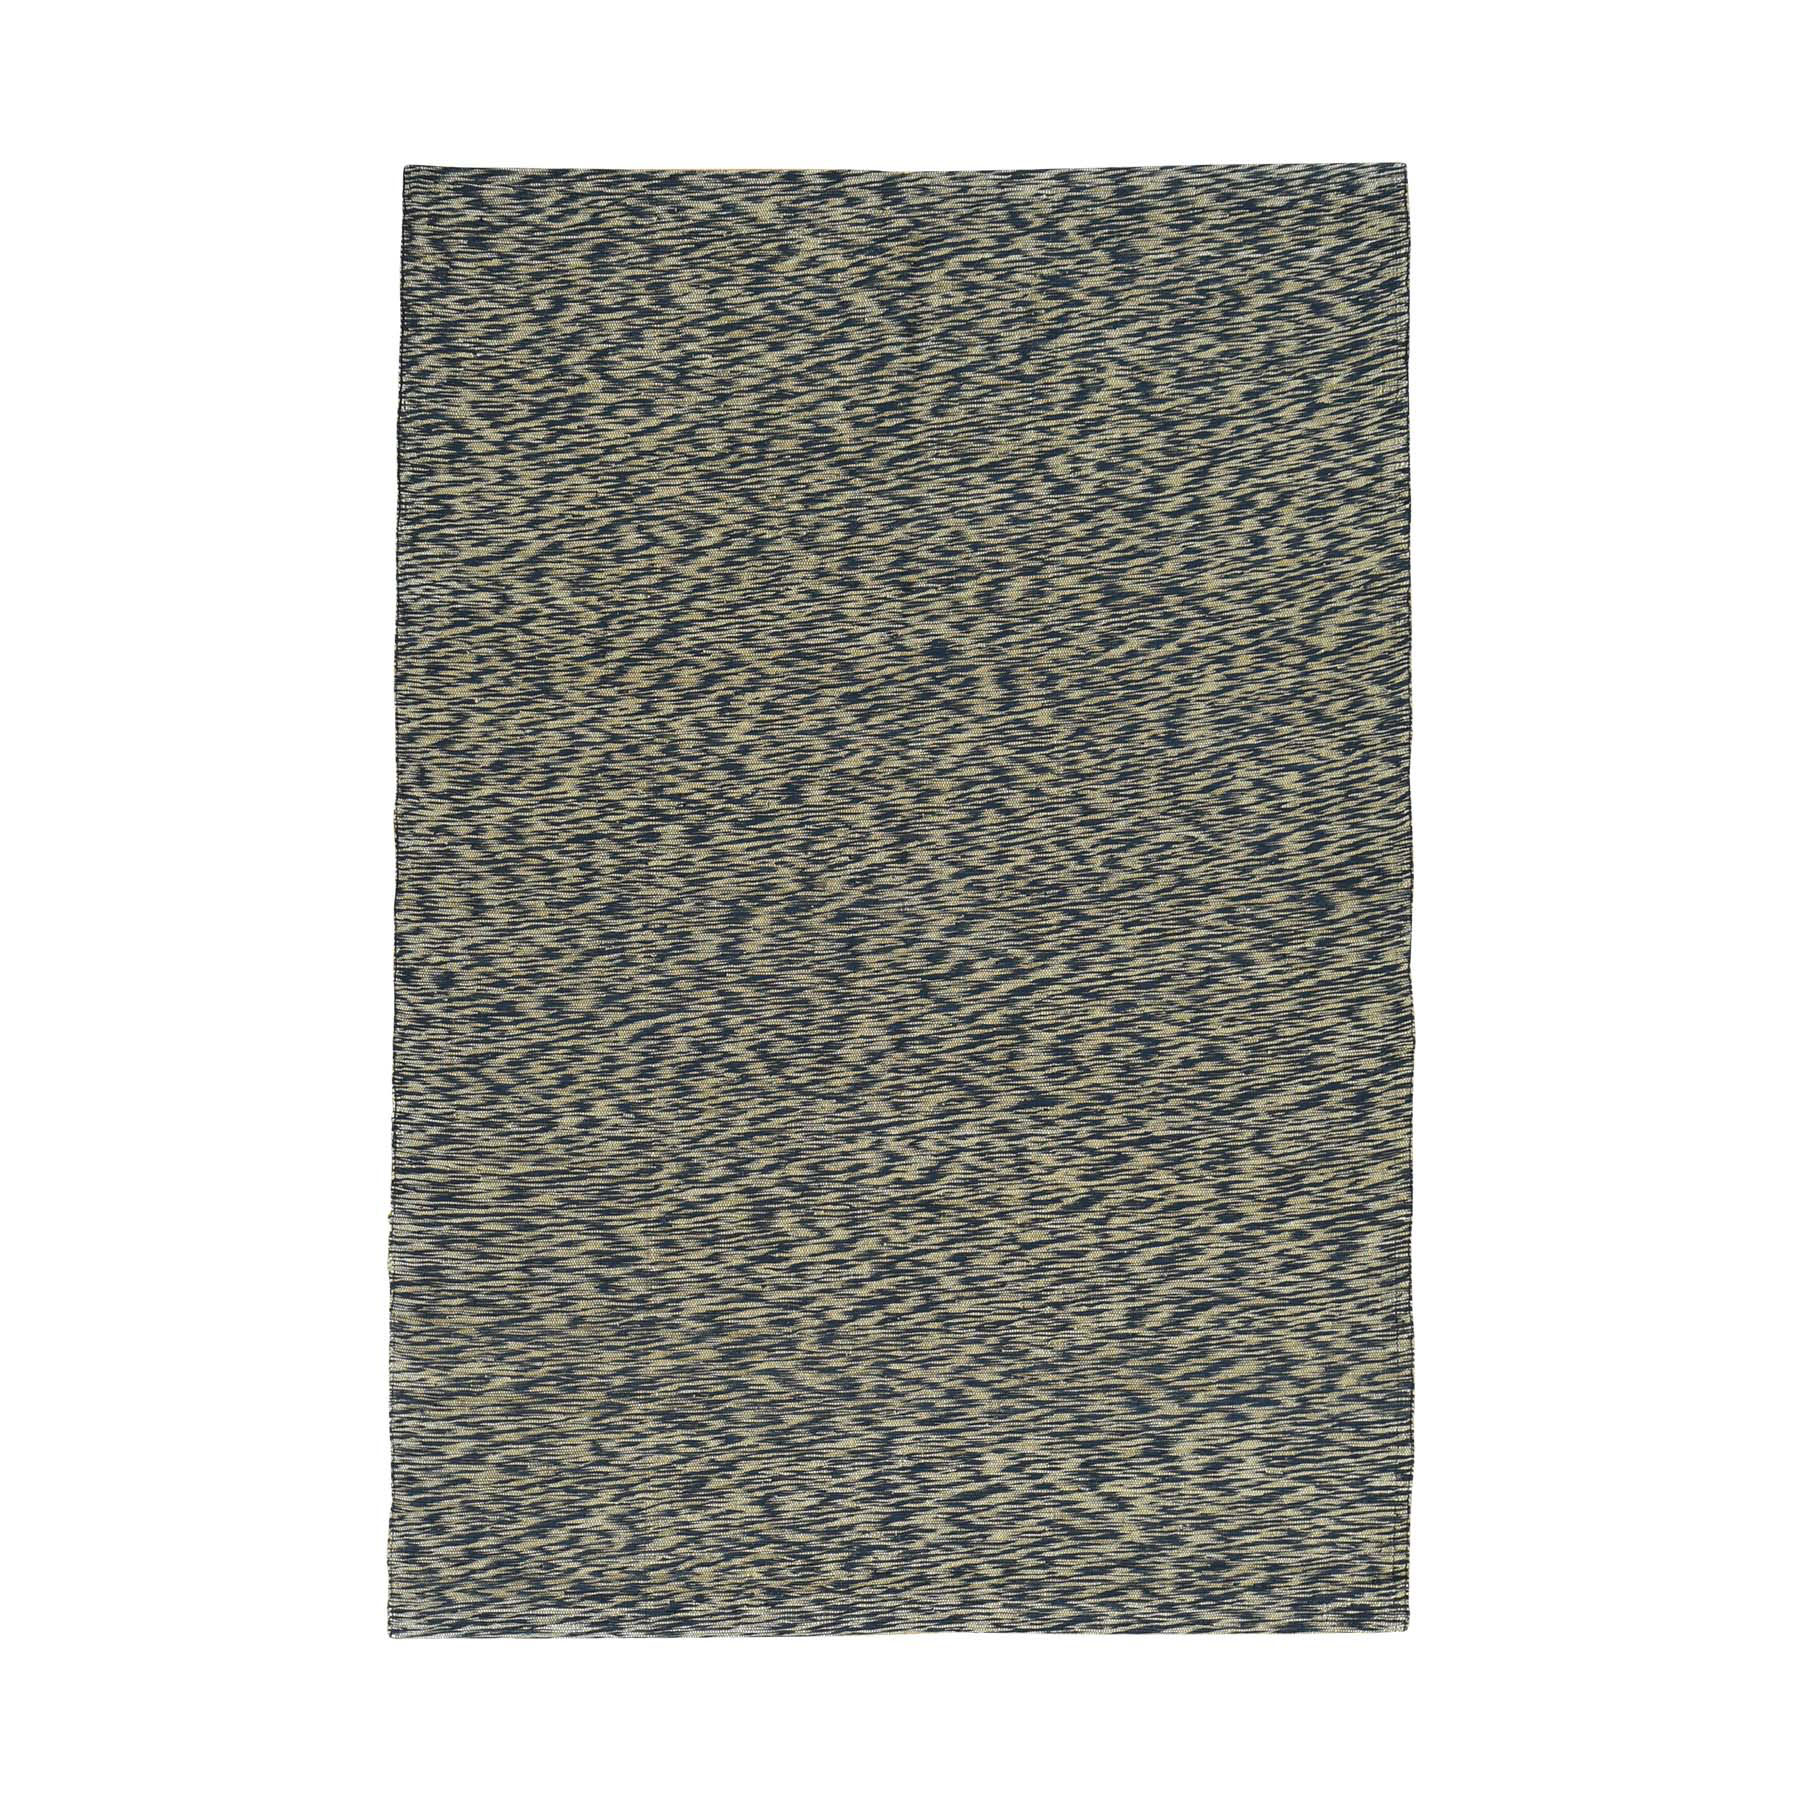 4'6"X6'6" On Clearance Pure Wool Leather Chain Stitch Modern Hand-Woven Oriental Rug moacbb7e